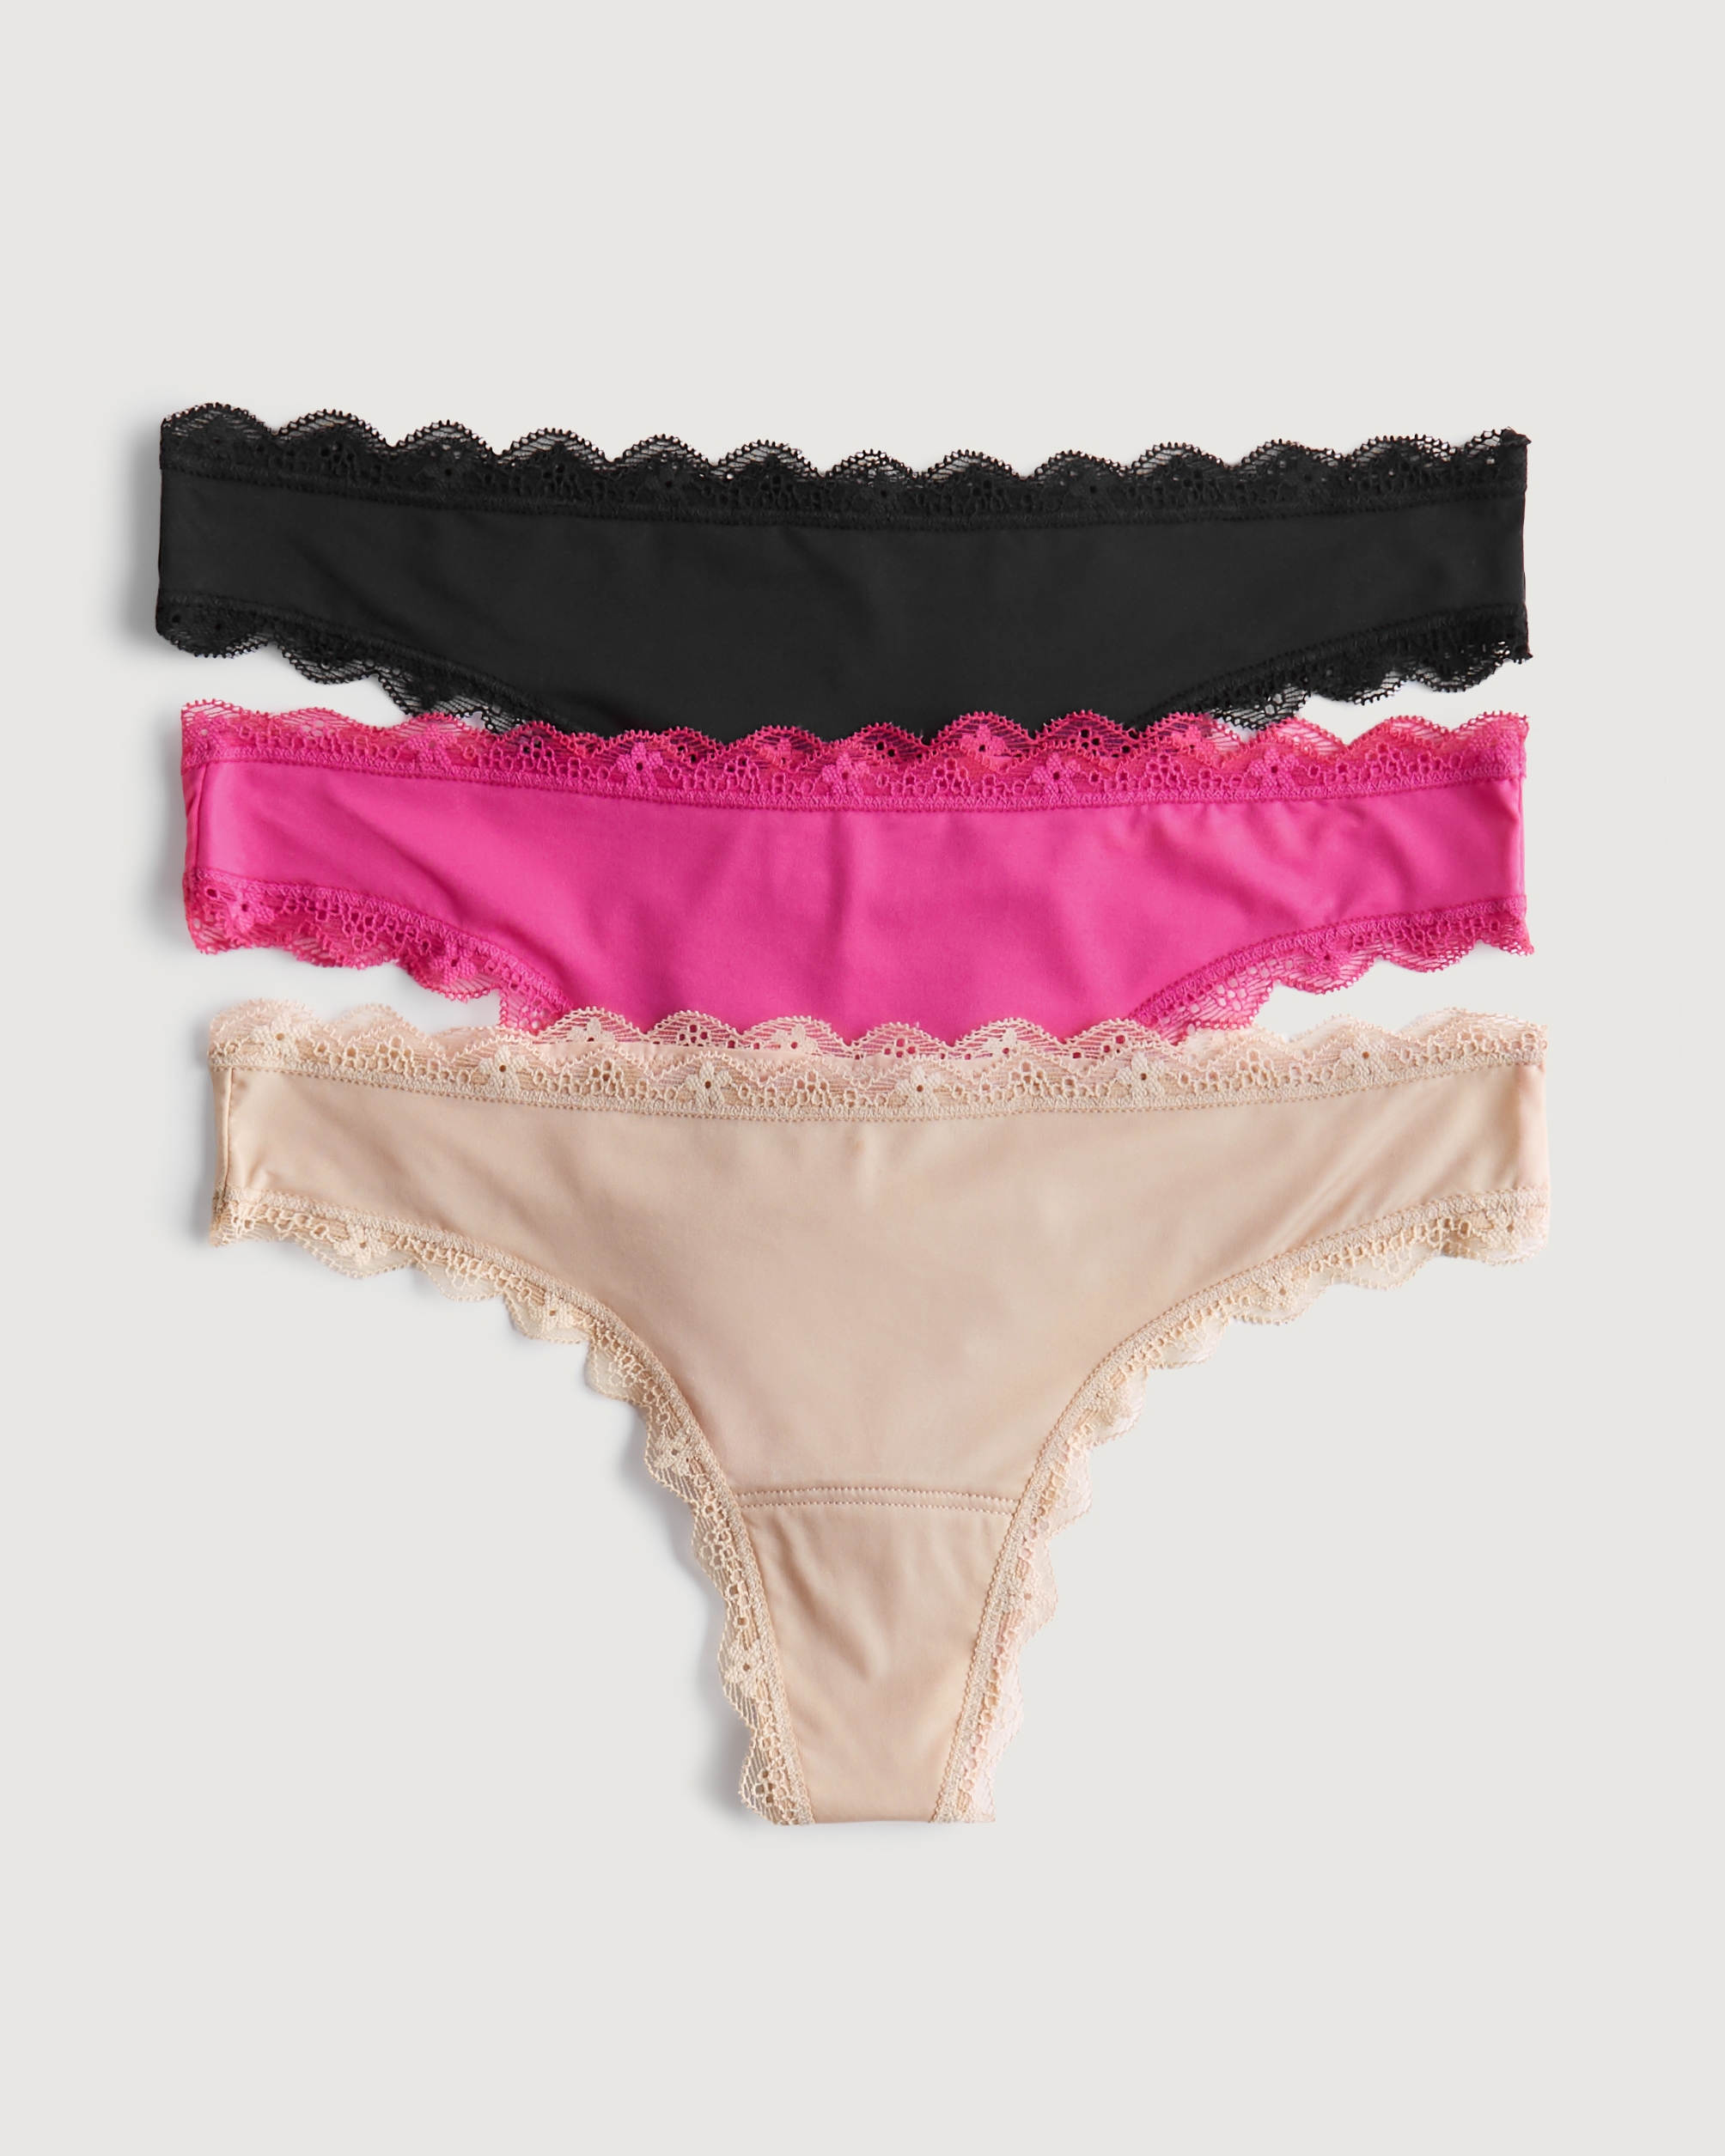 Gilly Hicks Micro Thong Underwear 3-Pack